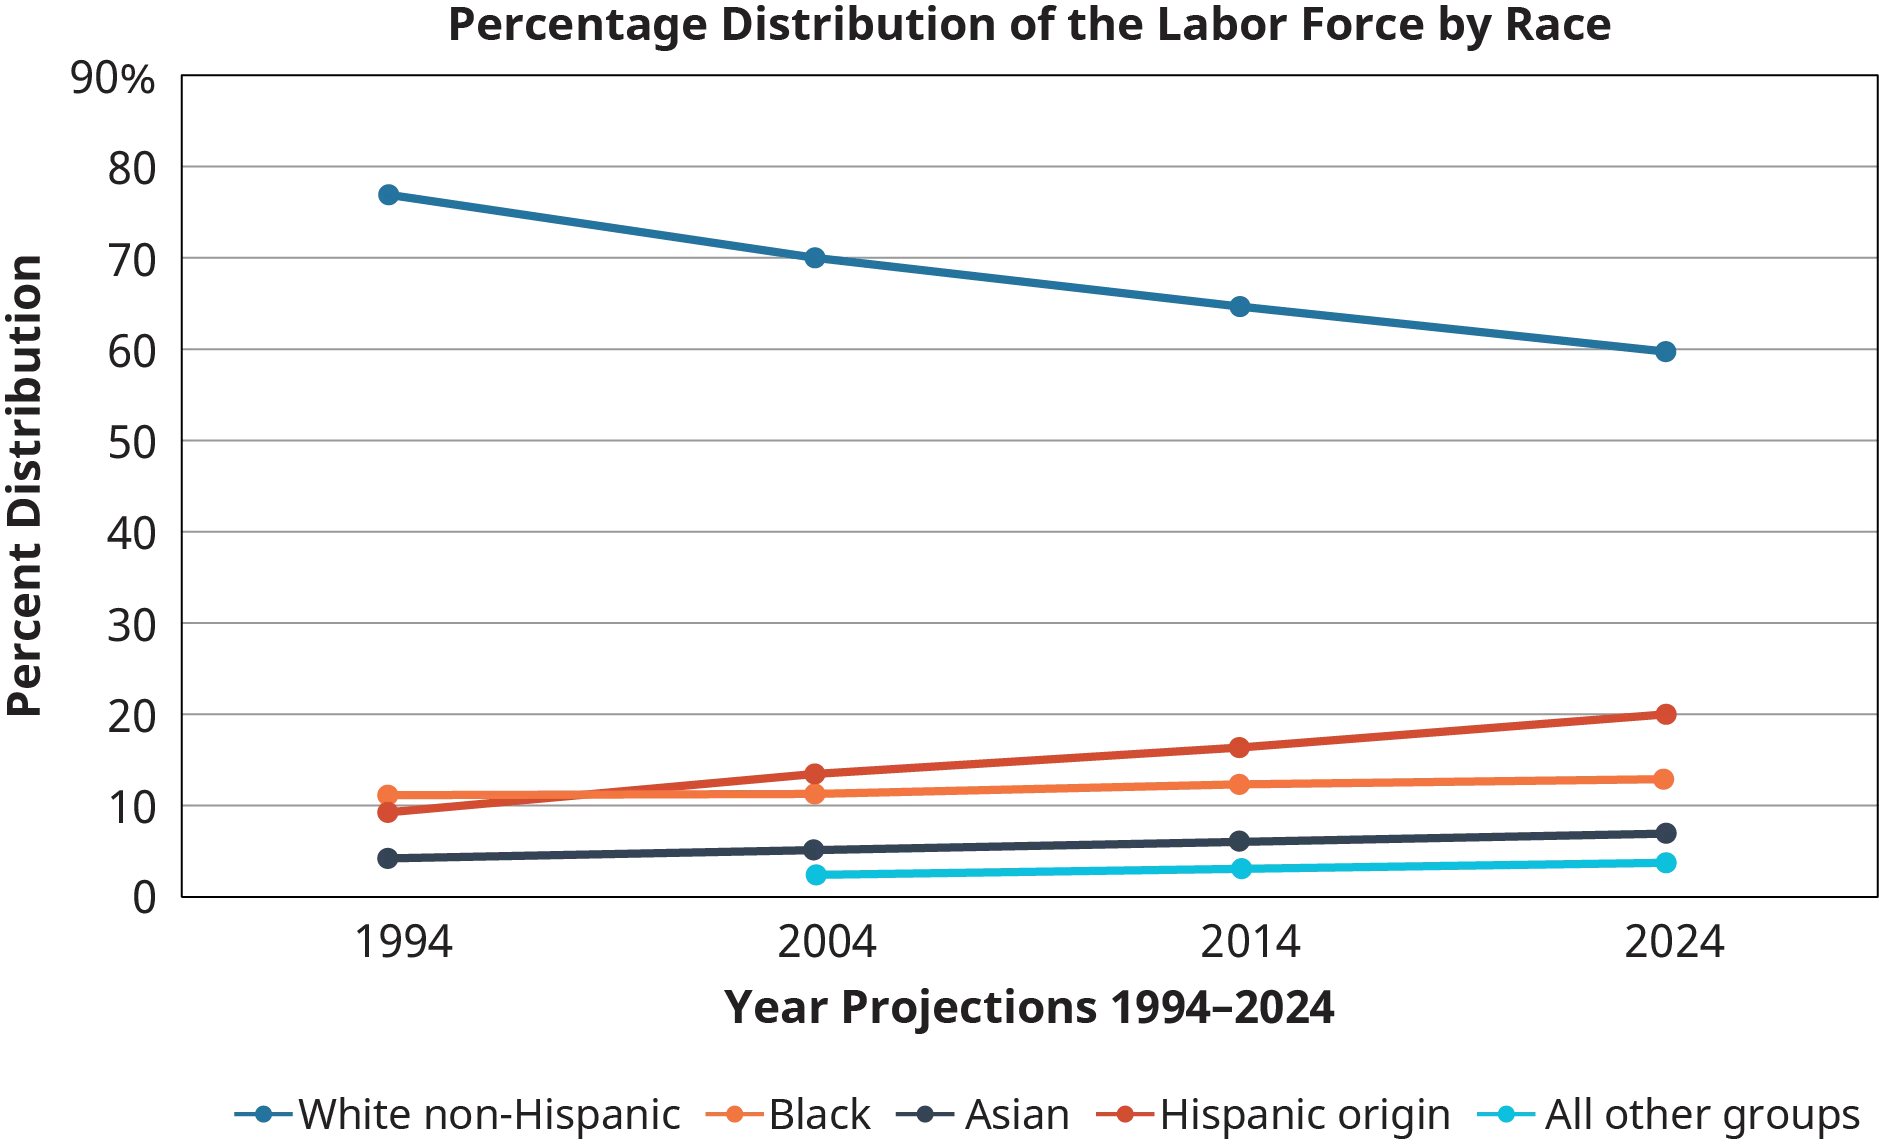 A multiple line graph titled “Percentage Distribution of the Labor Force by Race” is shown.